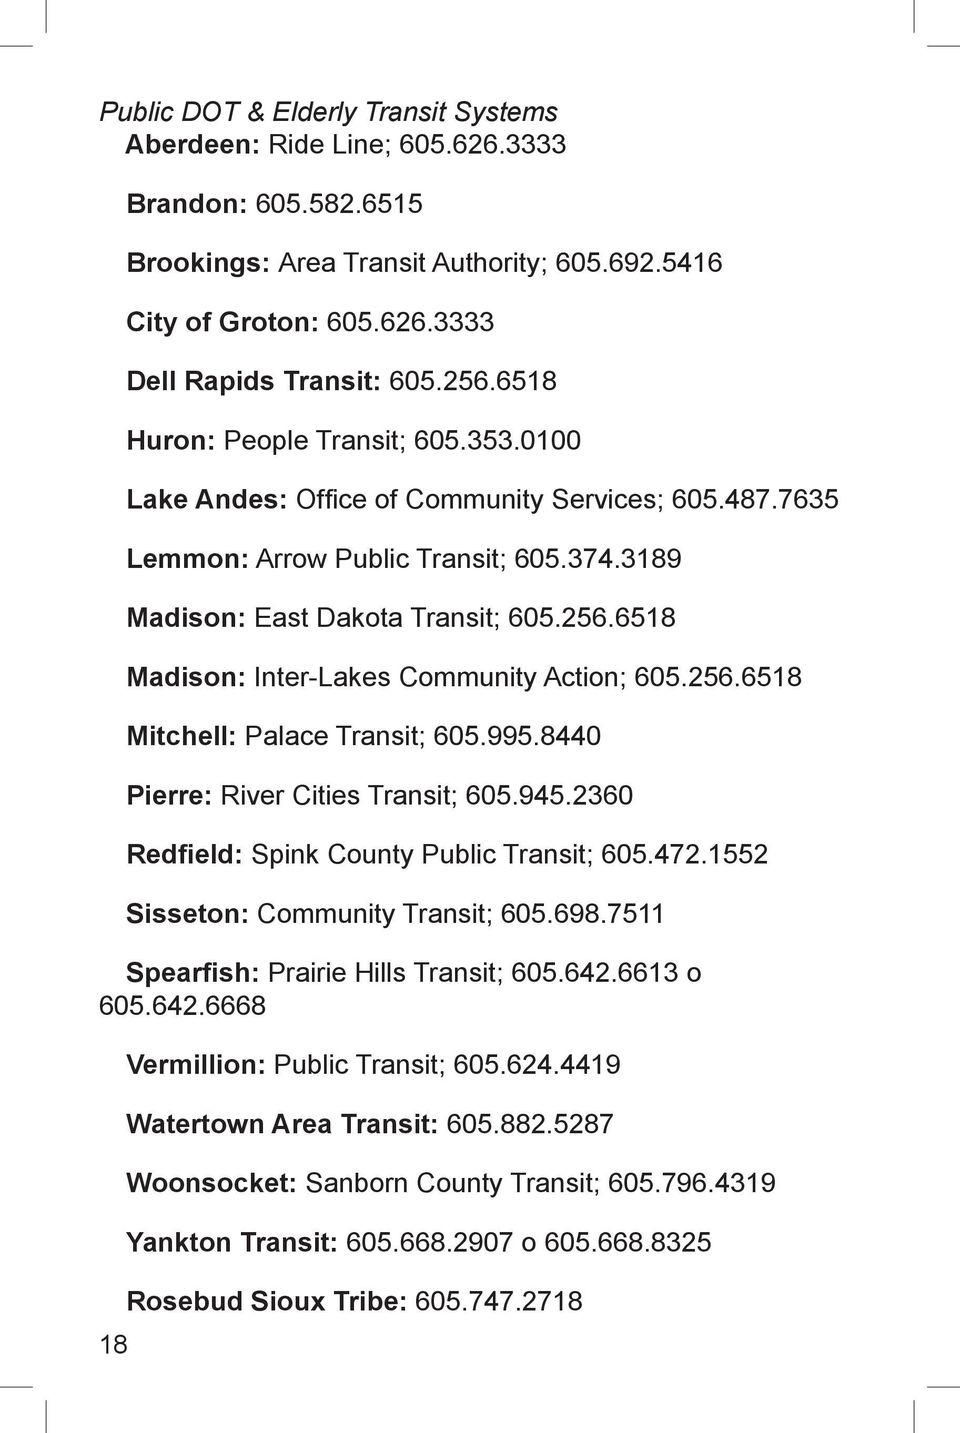 6518 Madison: Inter-Lakes Community Action; 605.256.6518 Mitchell: Palace Transit; 605.995.8440 Pierre: River Cities Transit; 605.945.2360 Redfield: Spink County Public Transit; 605.472.